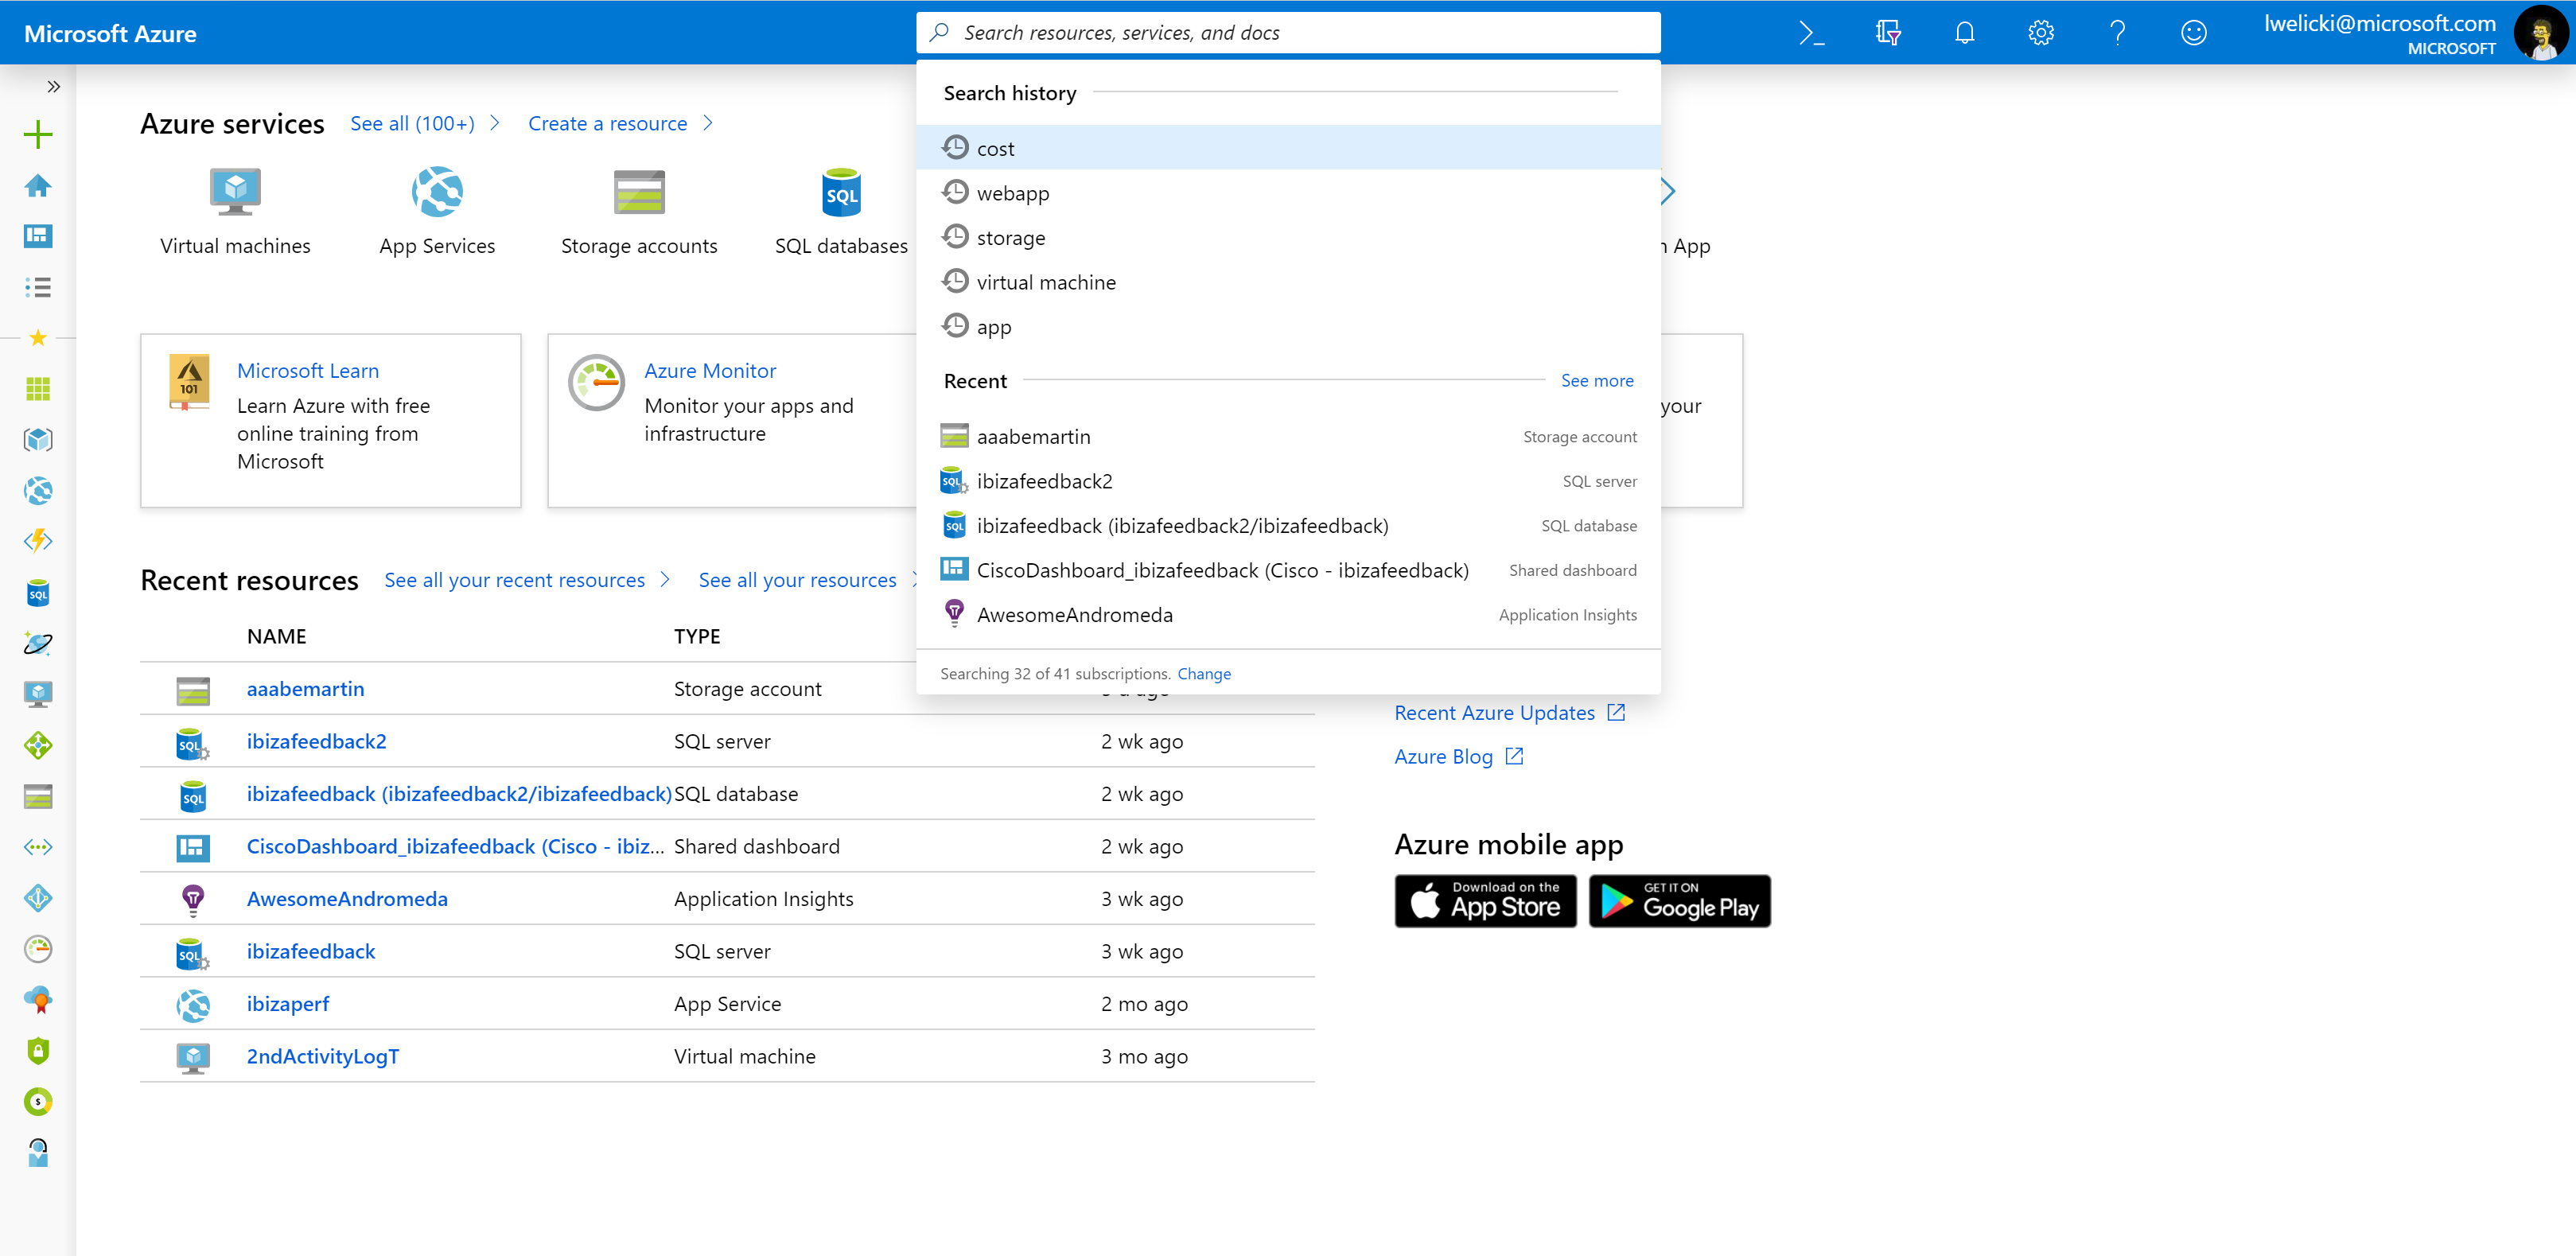 Global search history in the Azure portal